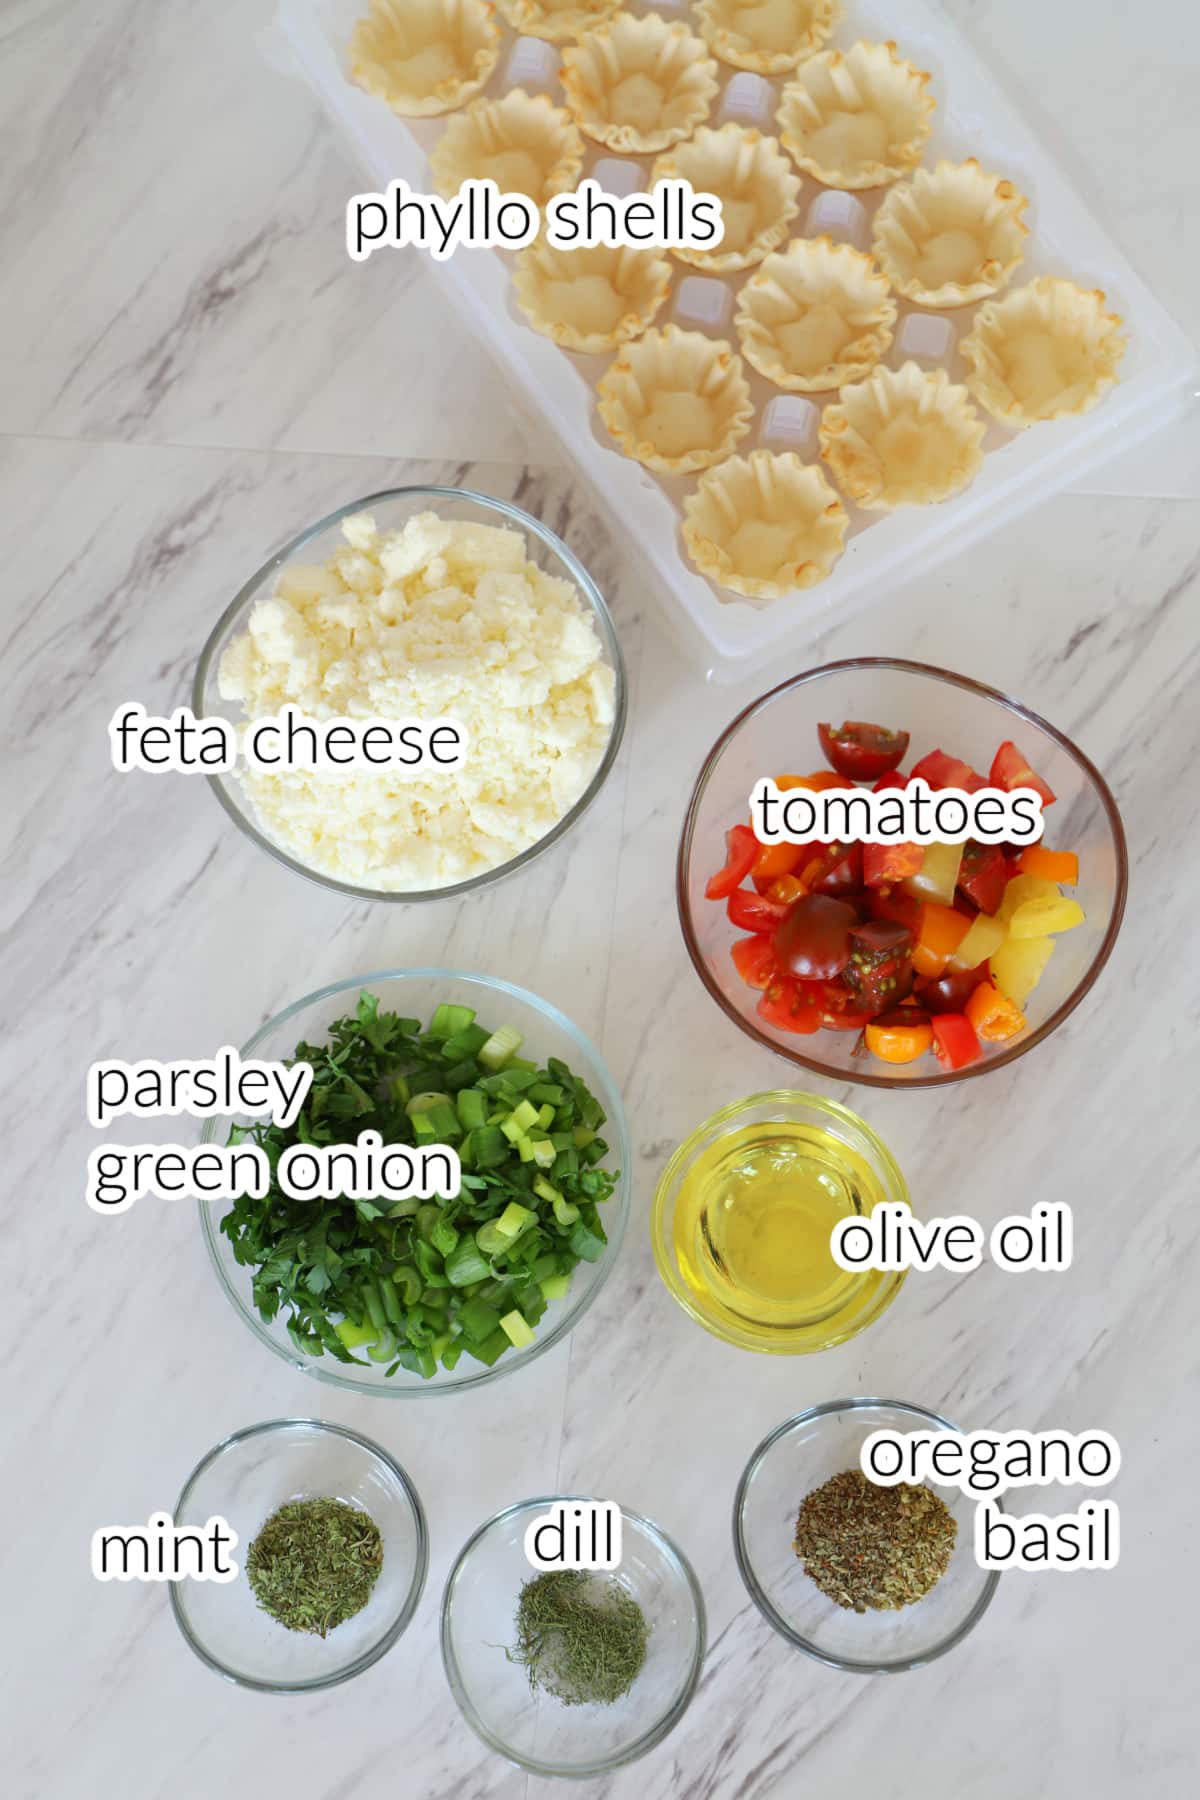 Recipe ingredients on a white table.